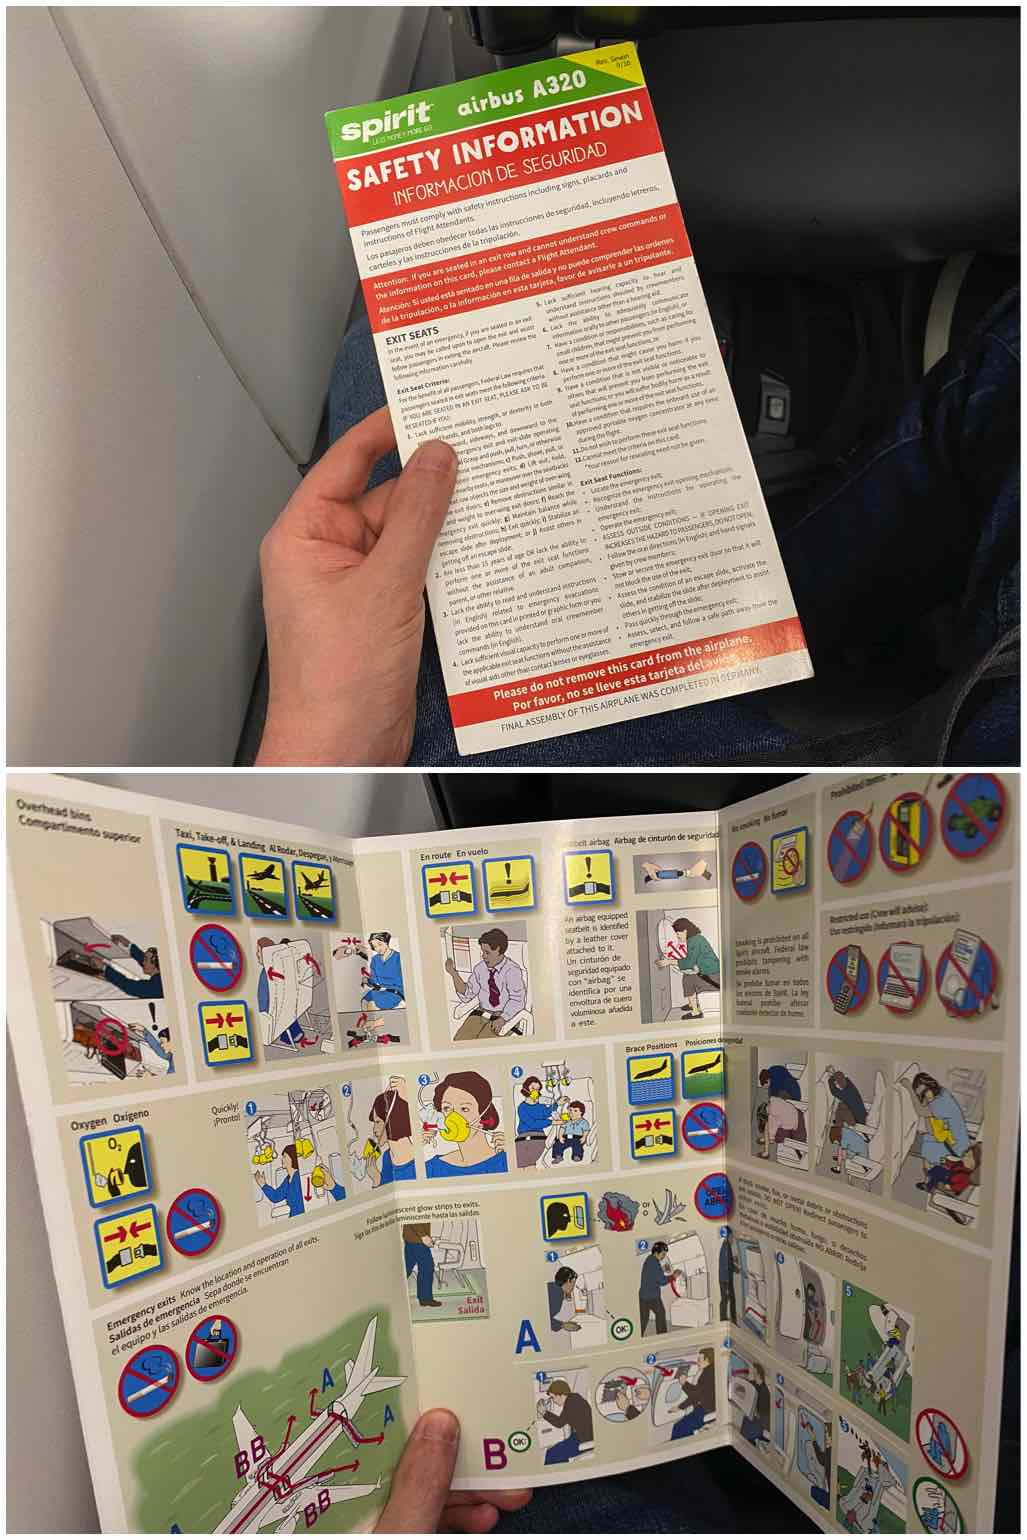 Spirit airlines A320neo safety card